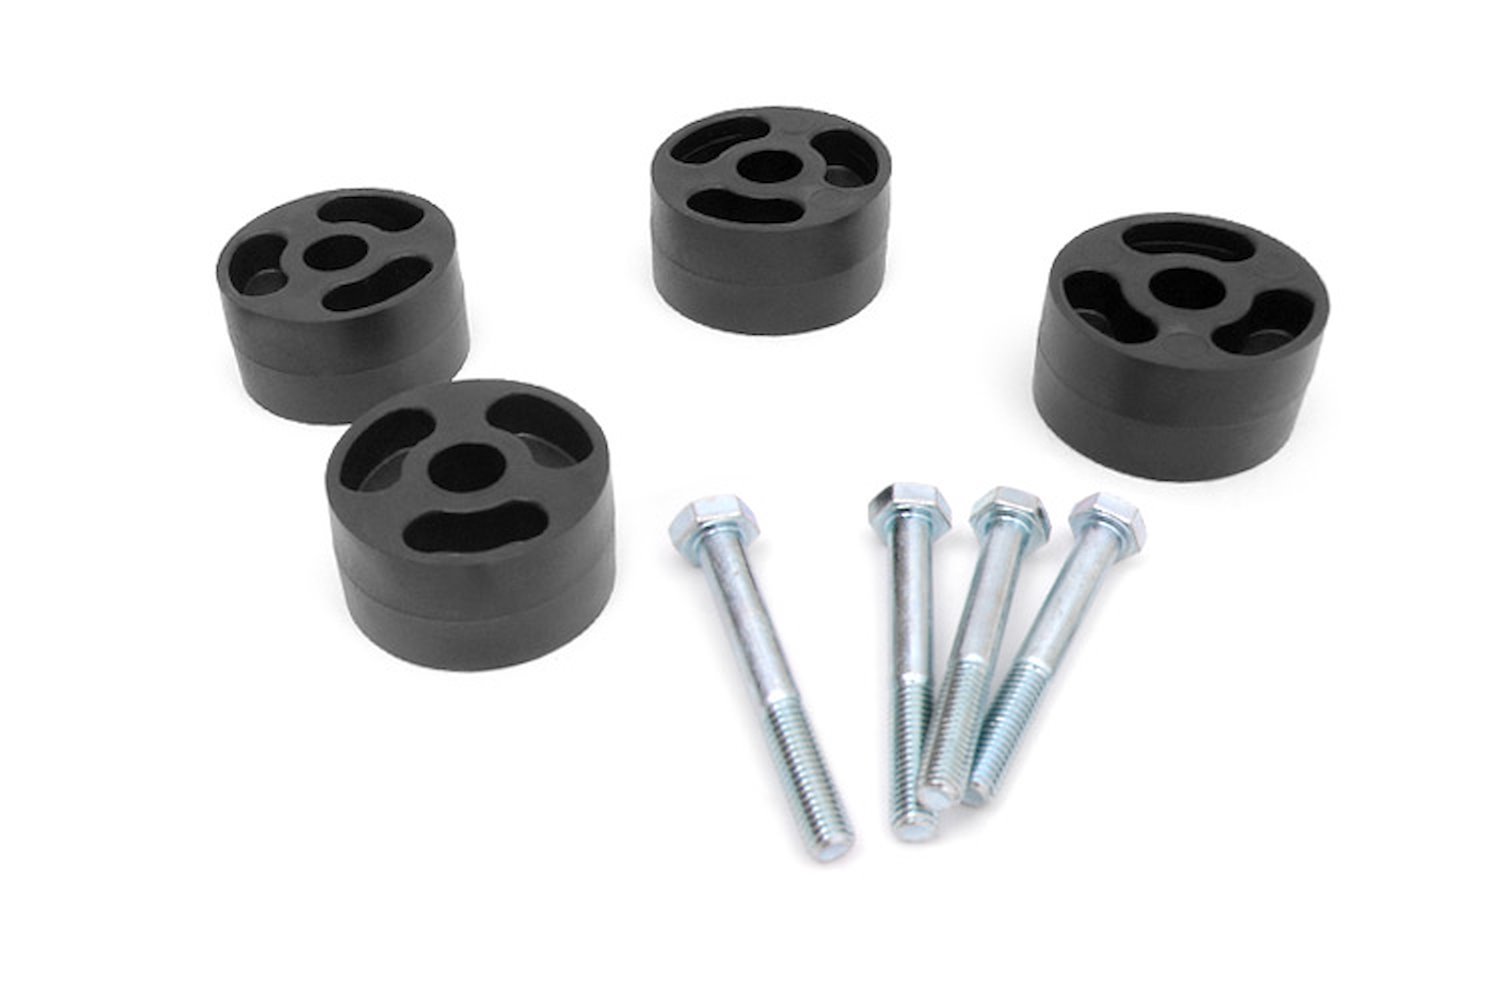 1072 Transfer Case Drop Kit for 4.5-6.5-inch Lifts